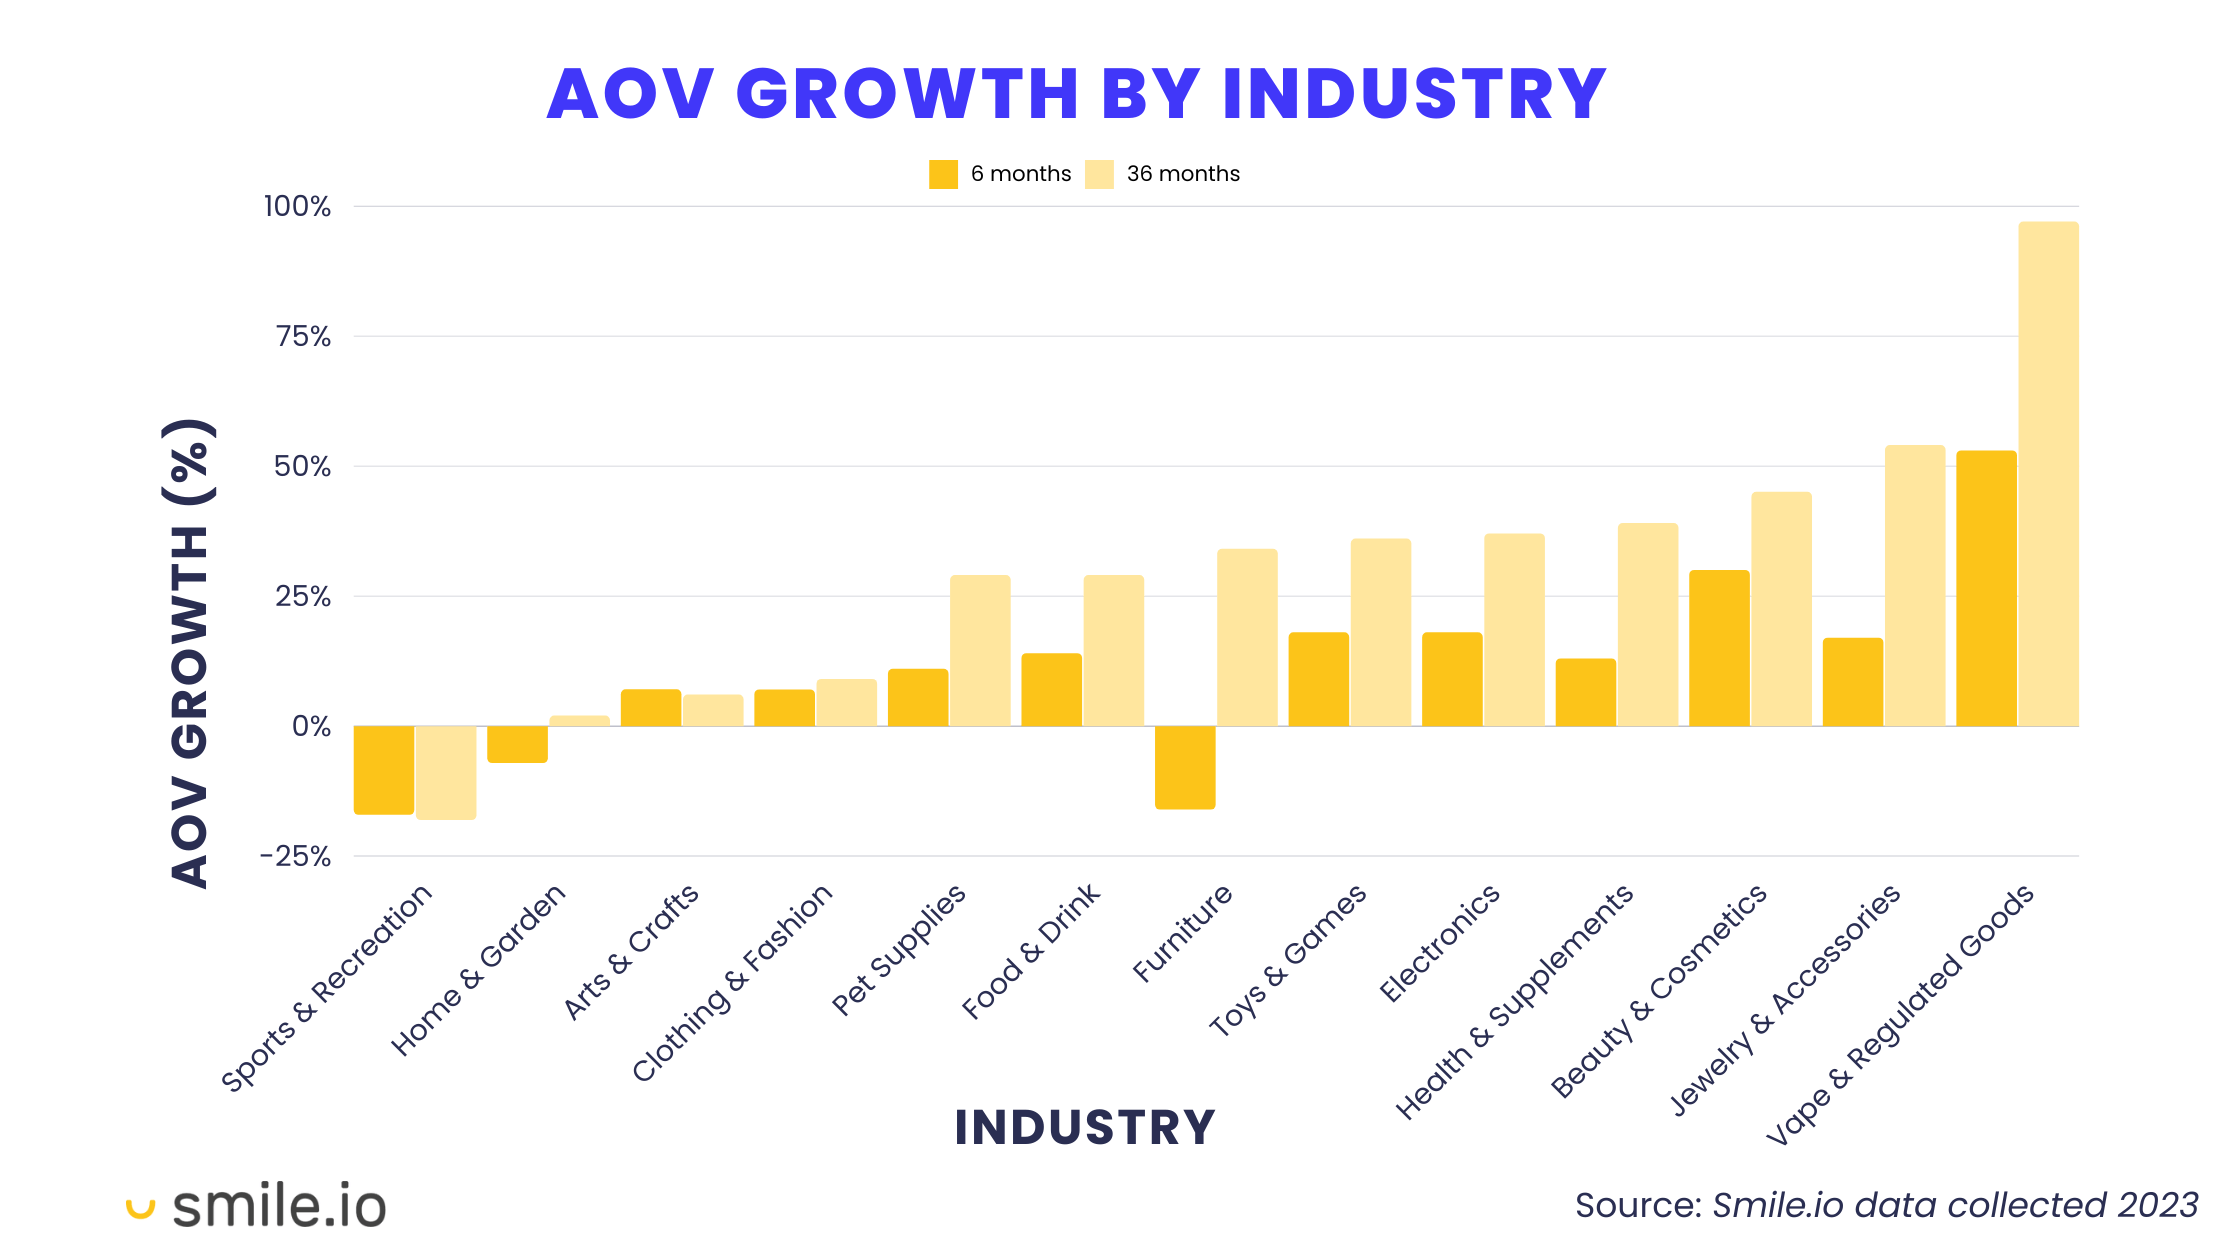 Repeat Customers Profitable–A bar chart showing the average order value growth from 6 months to 36 months by industry. 